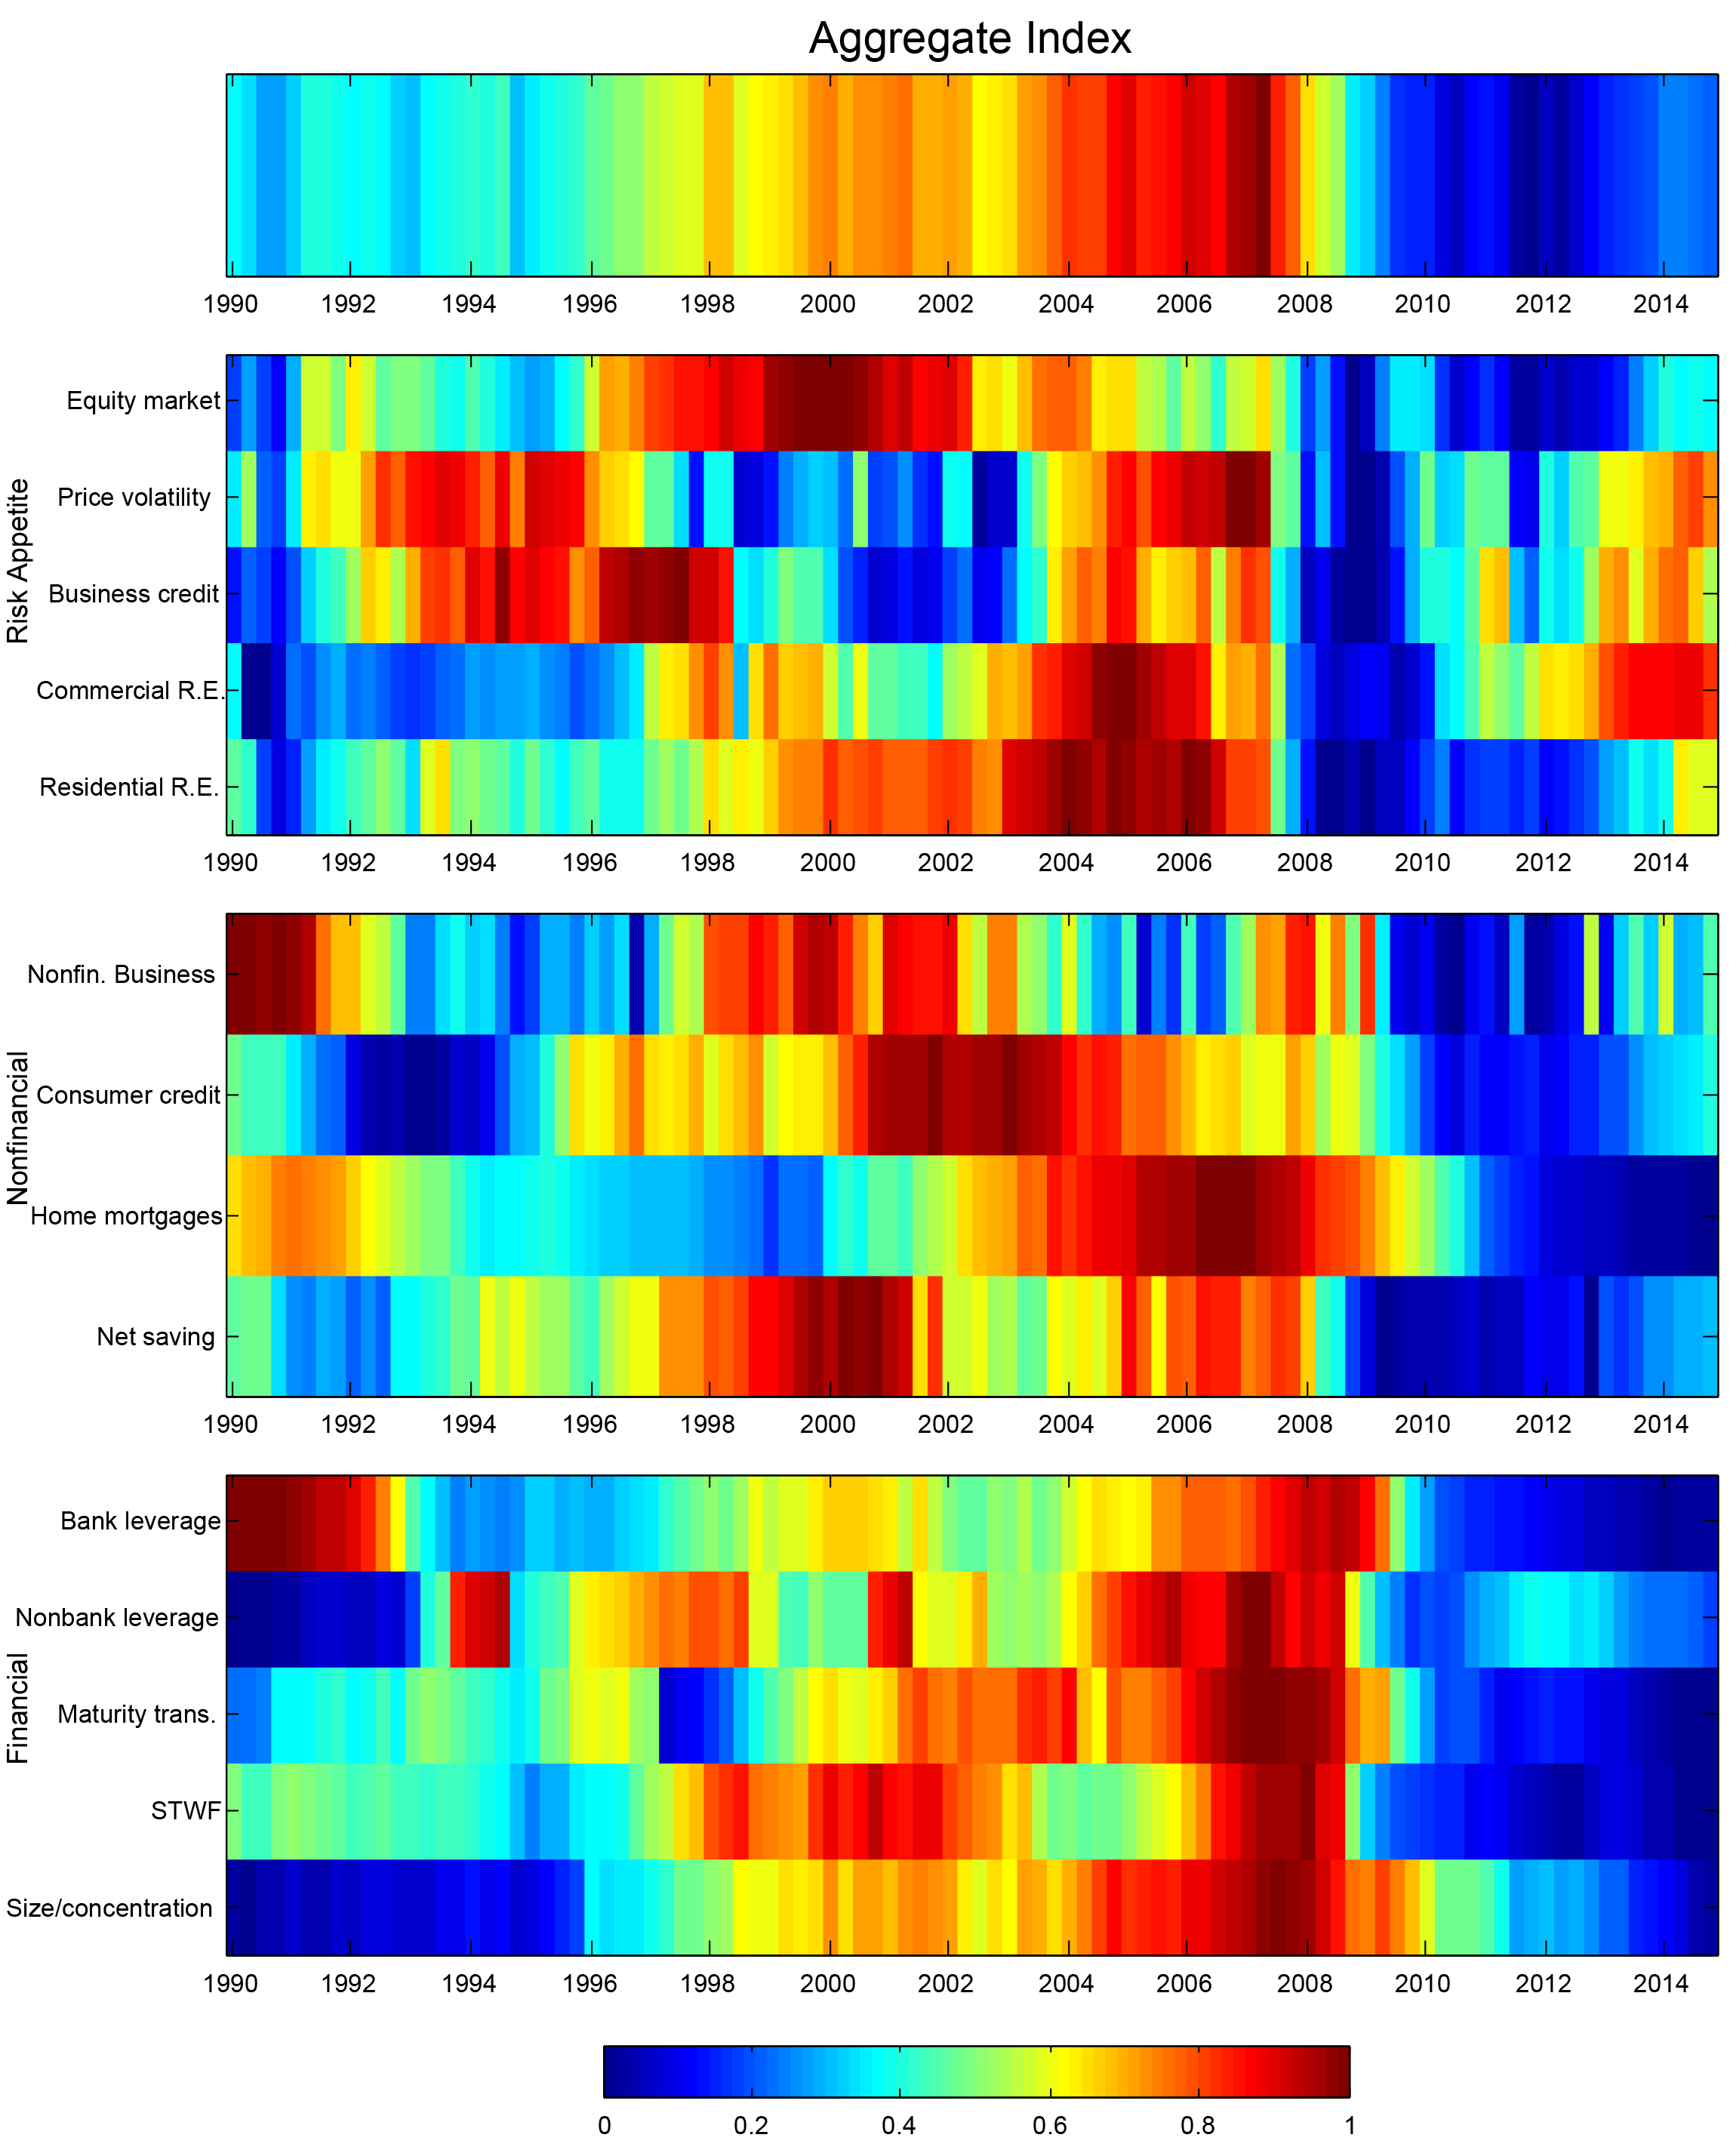 Figure 4: Heat Map of the Overall Vulnerability Index and Its Components. See accessible link for data description.